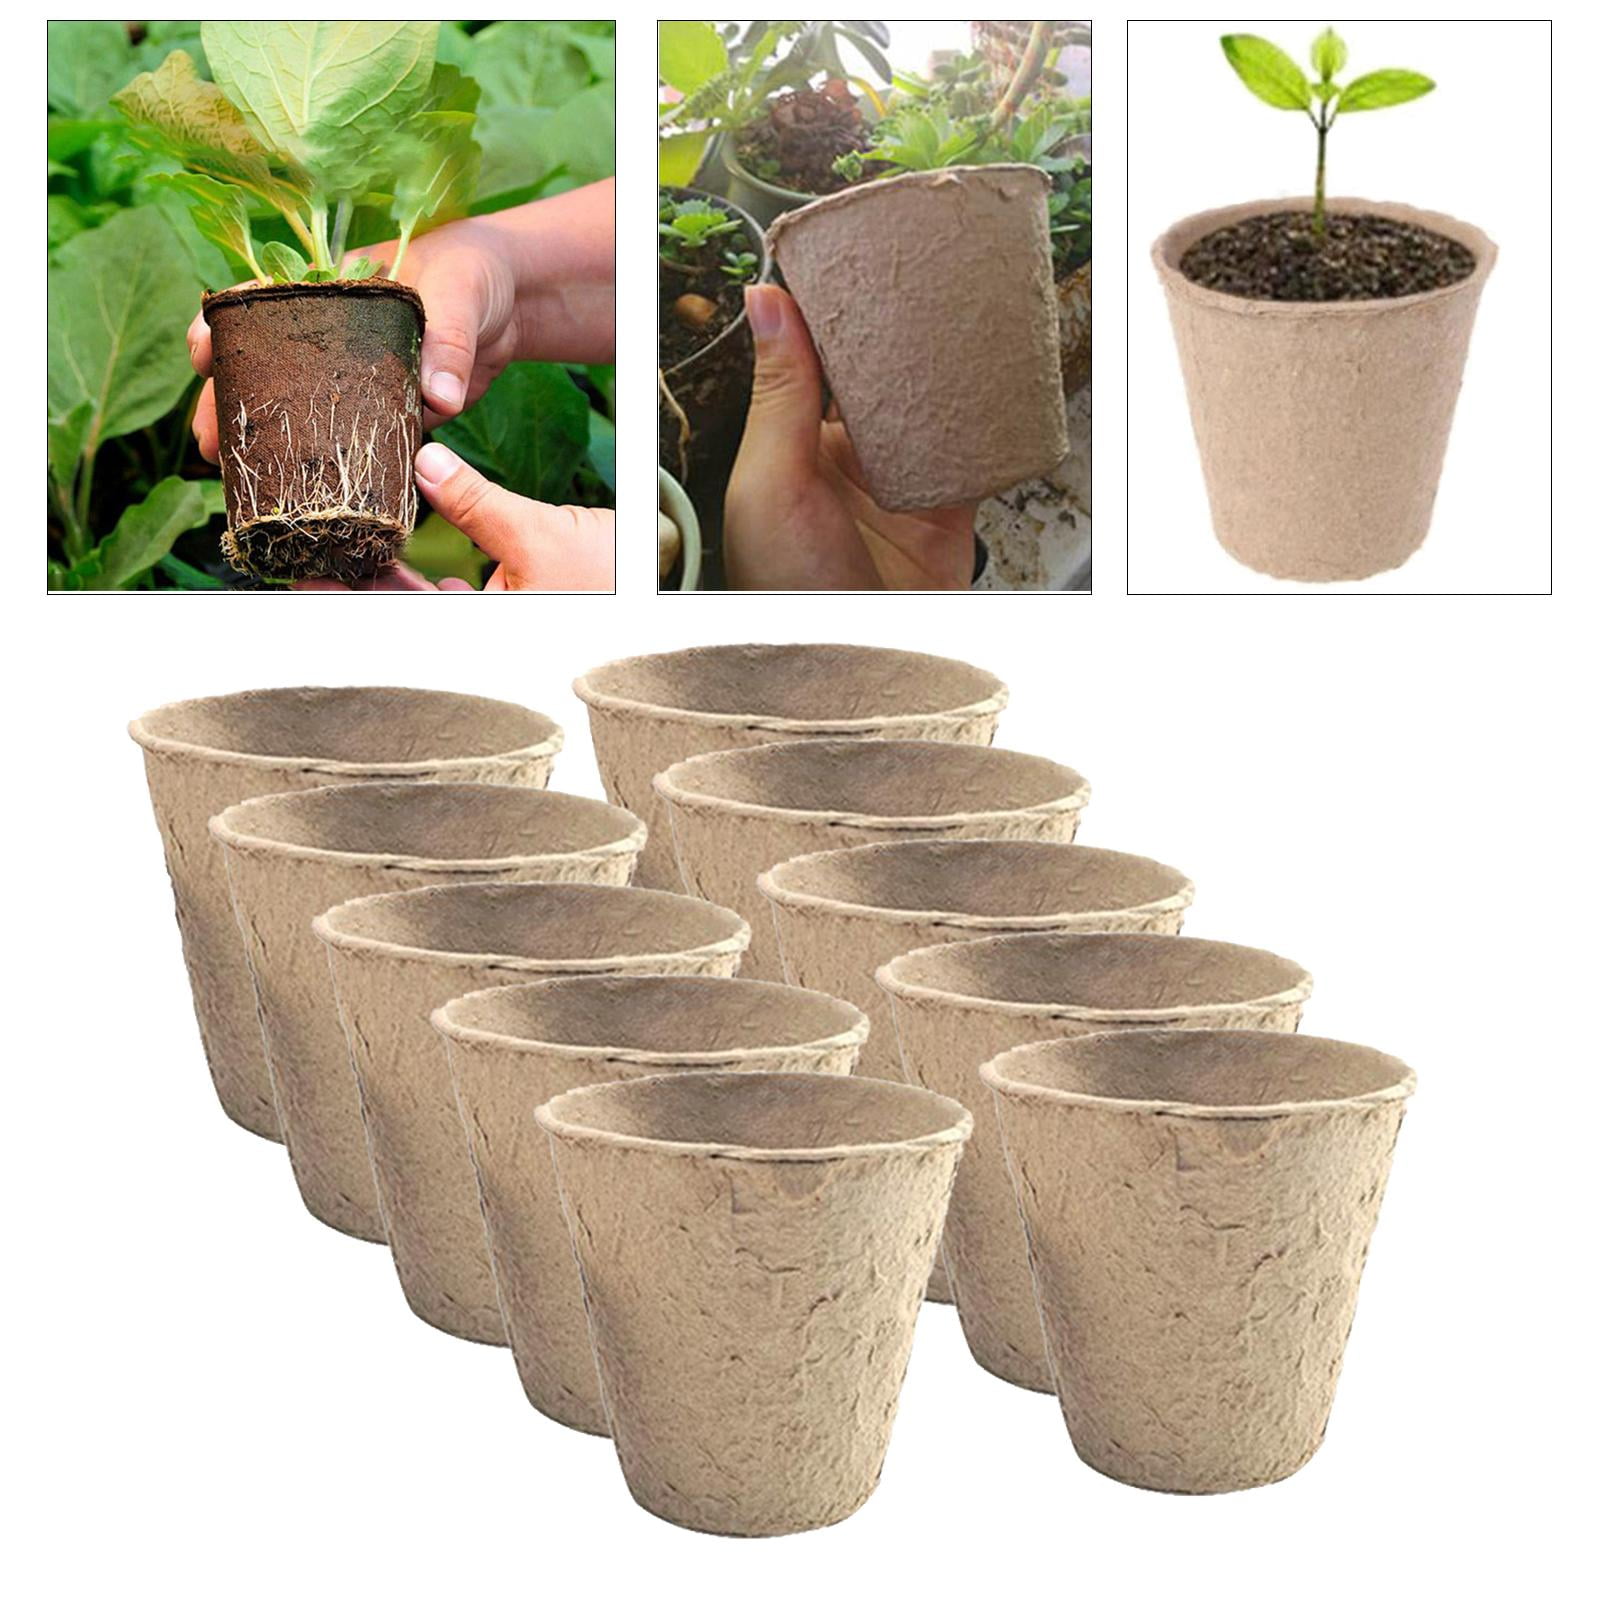 Garden Round Peat Pots Cups Nursery Herb Seed Tray Planting Tools Plant Seedling 